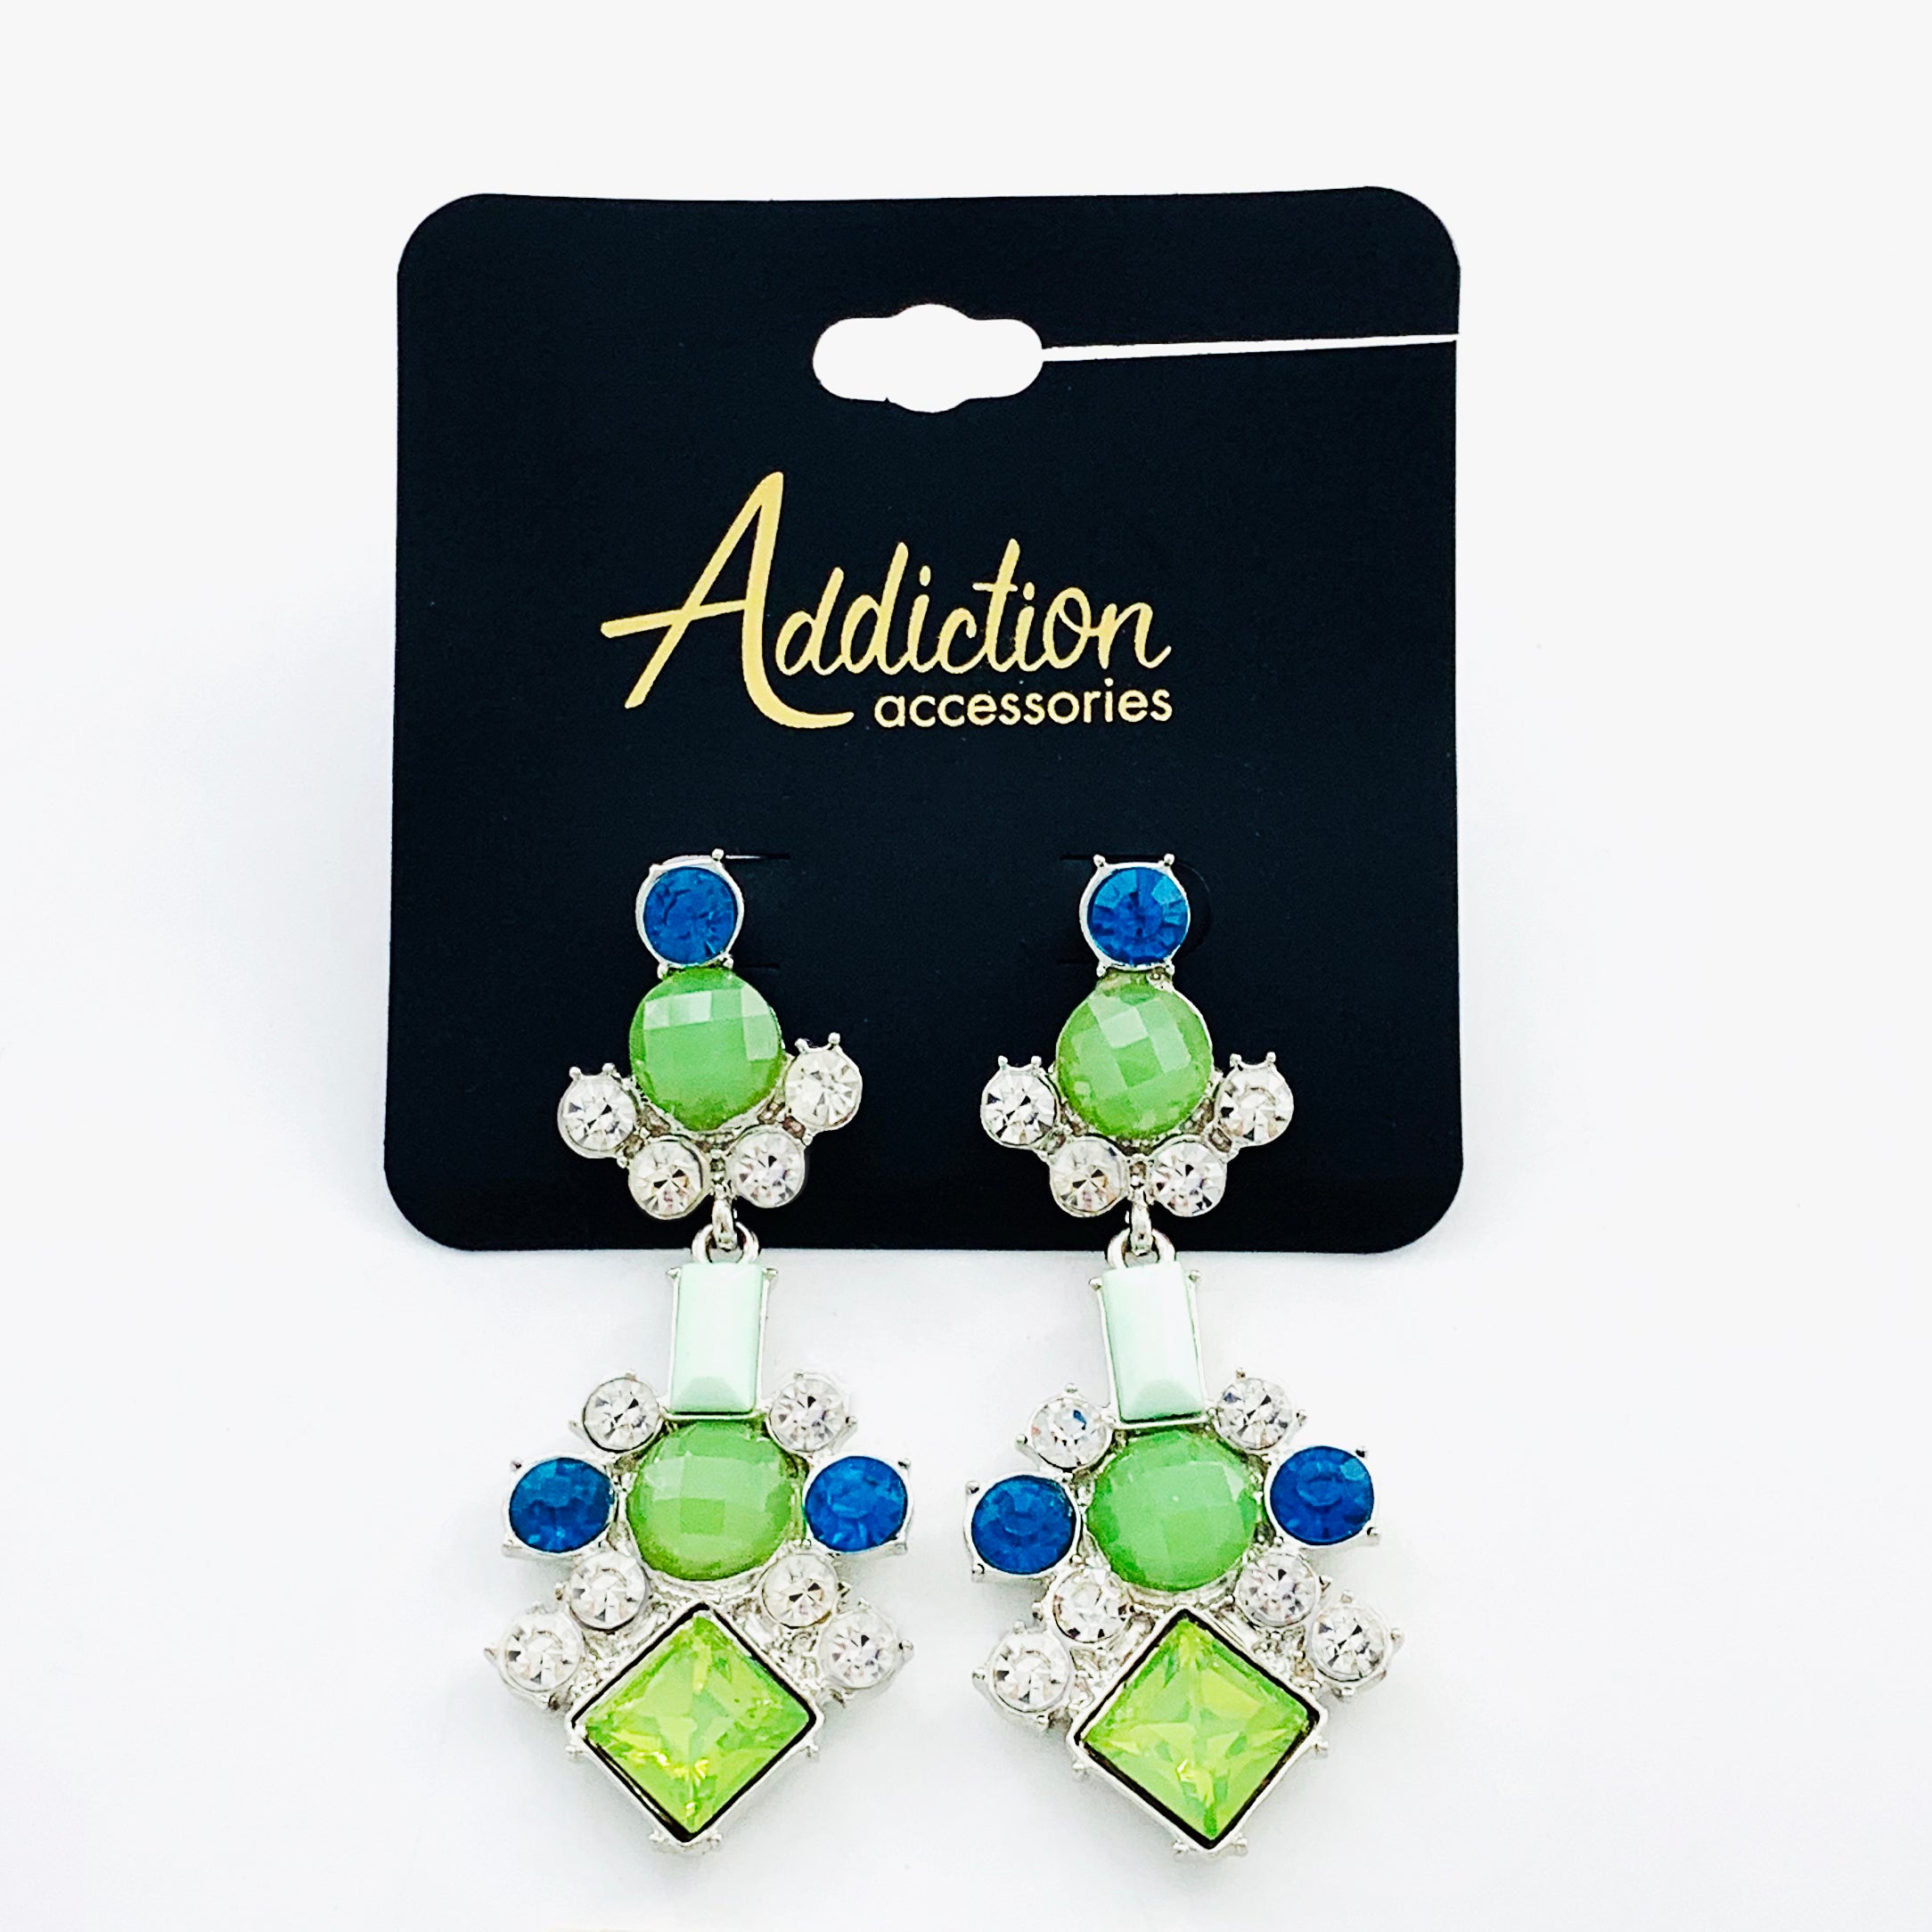 Earrings with green, blue stones and diamantes